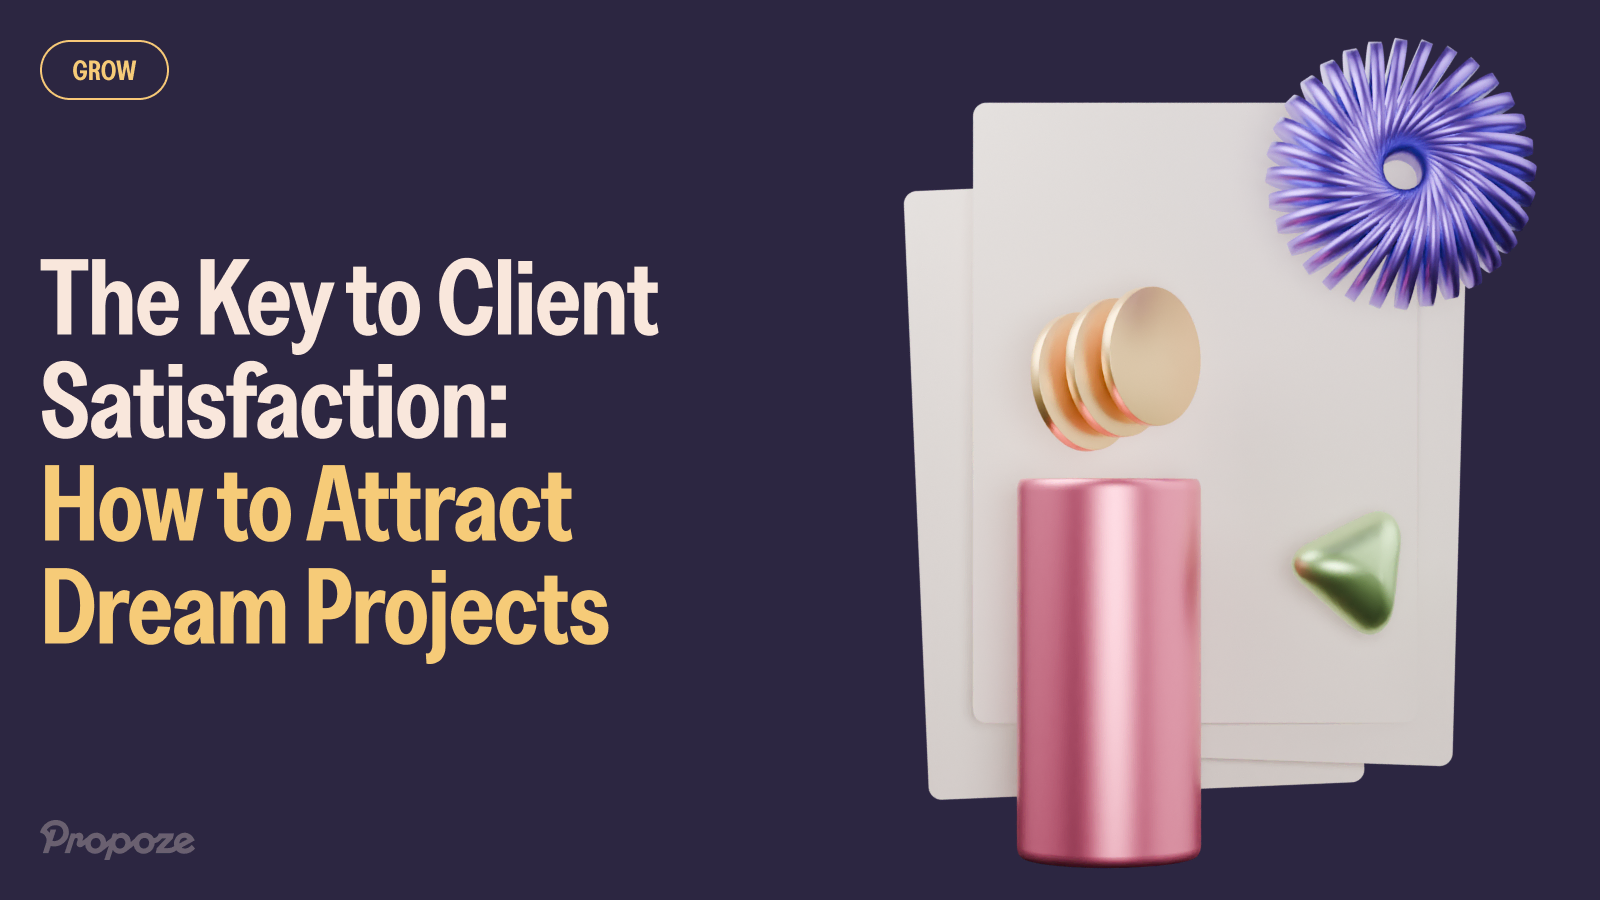 The Key to Client Satisfaction: How to Attract Dream Projects